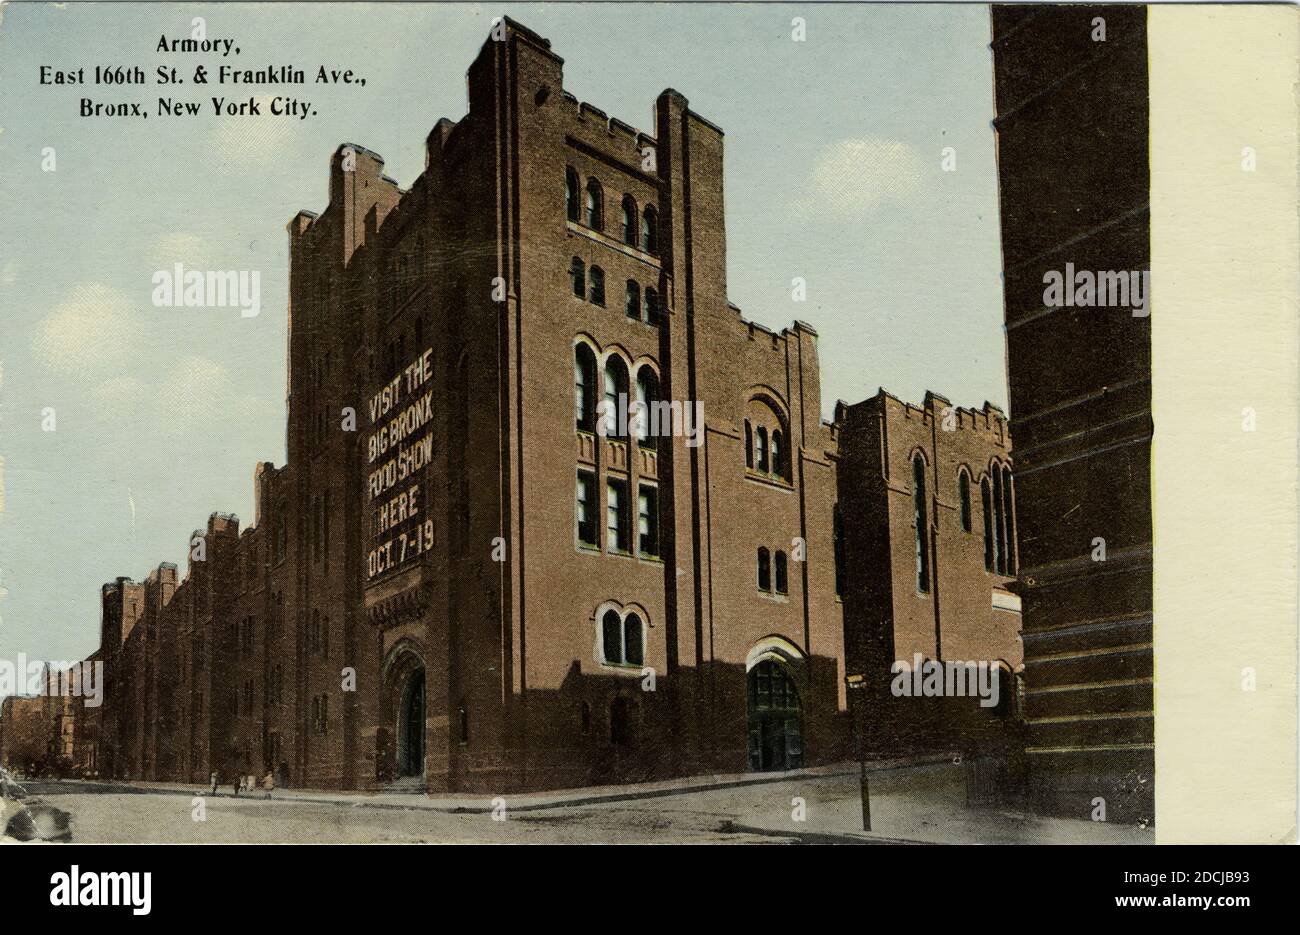 Armory, East 166th St. & Franklin Ave., Bronx, New York City, Still Image, Postcards, 1900 - 1909 Foto Stock